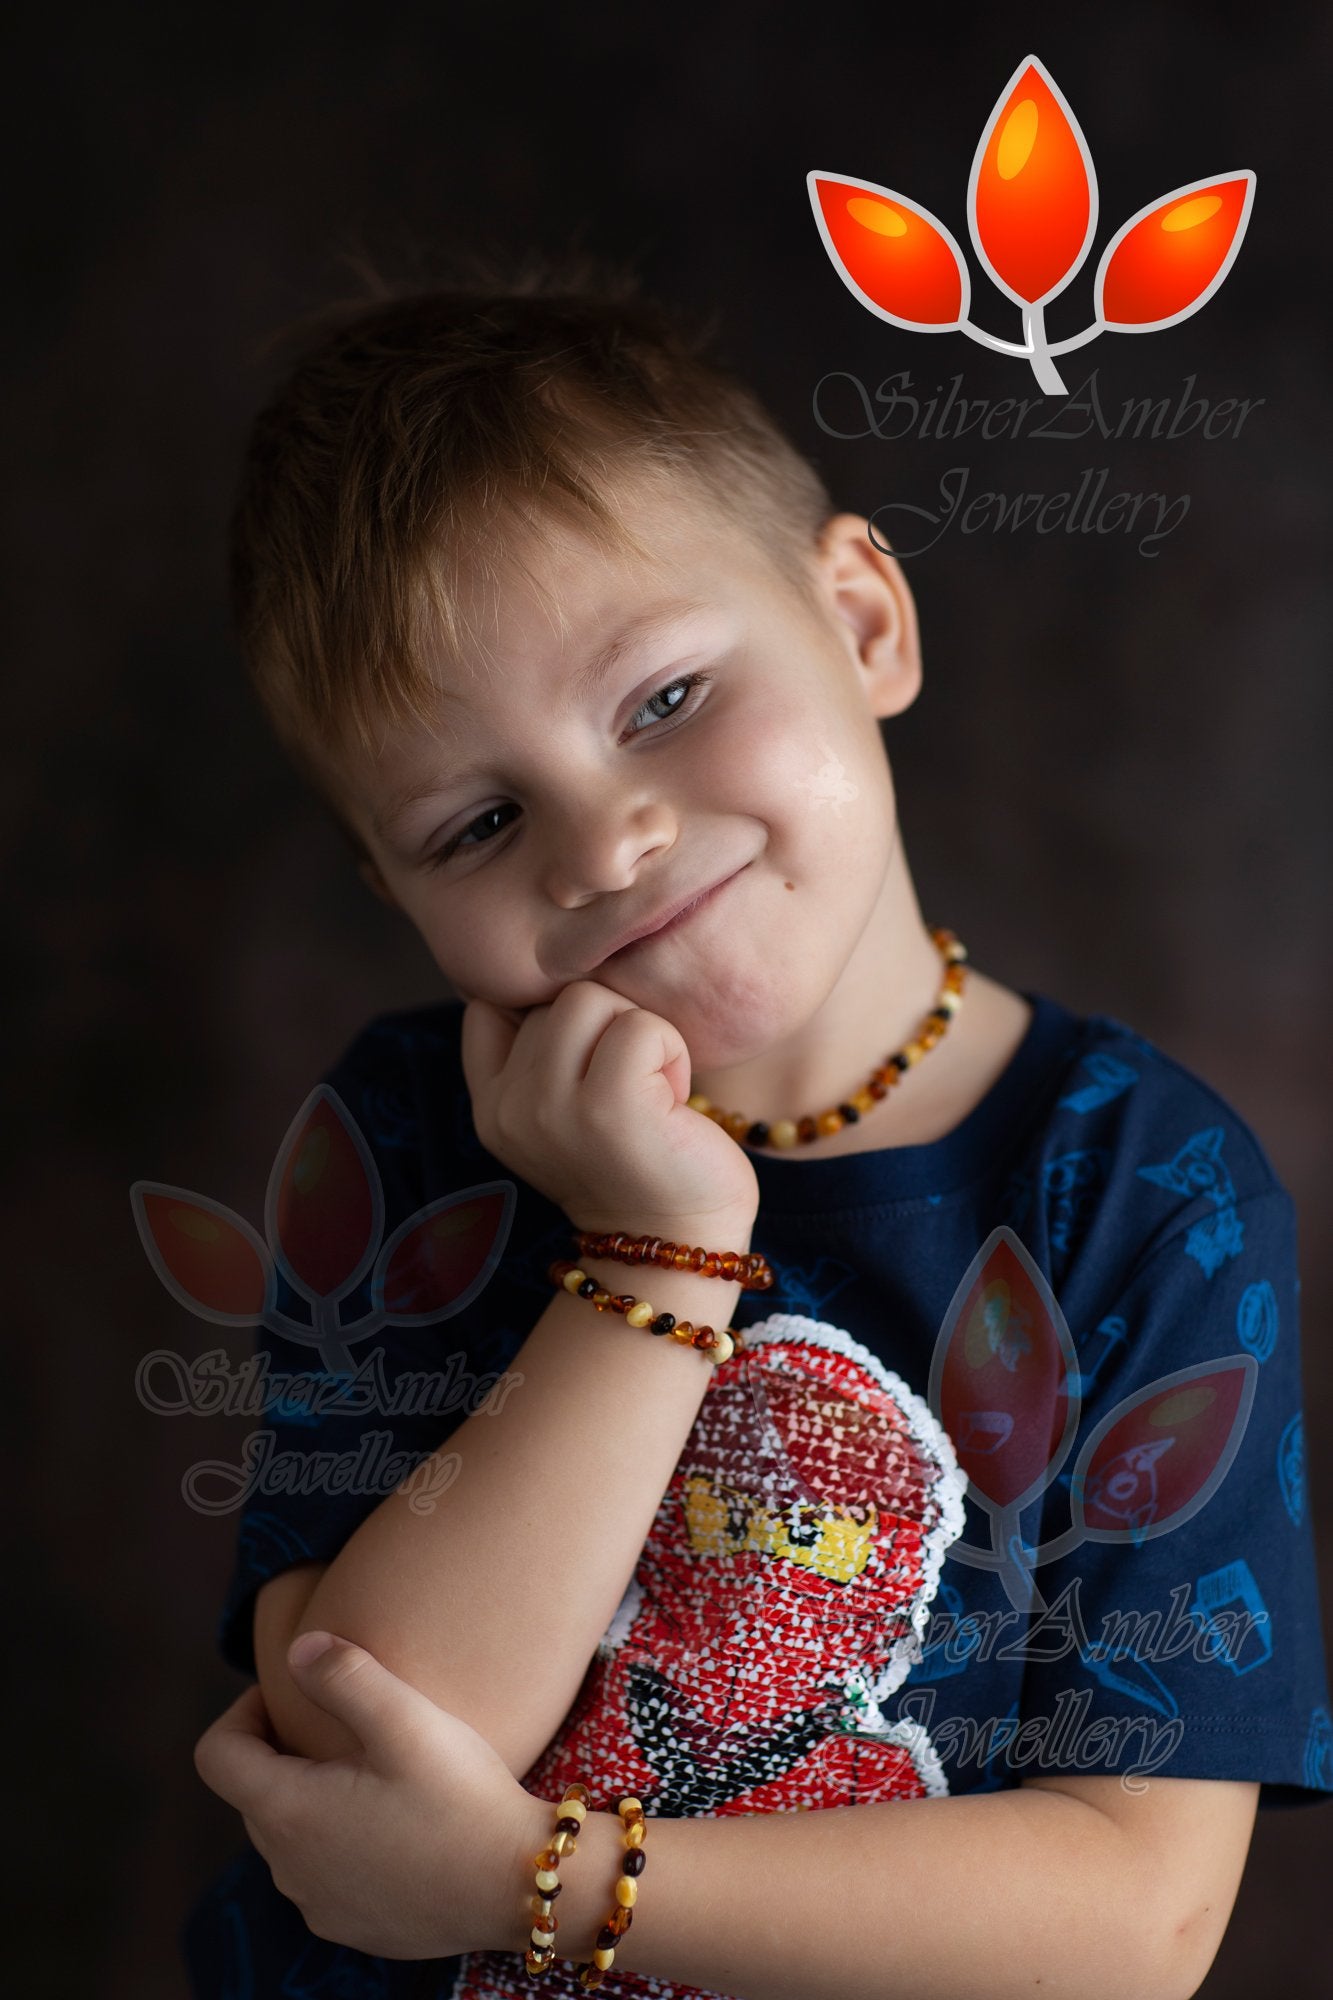 Beautiful Baroque Bracelets & Anklets in Cognac colour - Sizes Baby to Adults - SilverAmberJewellery